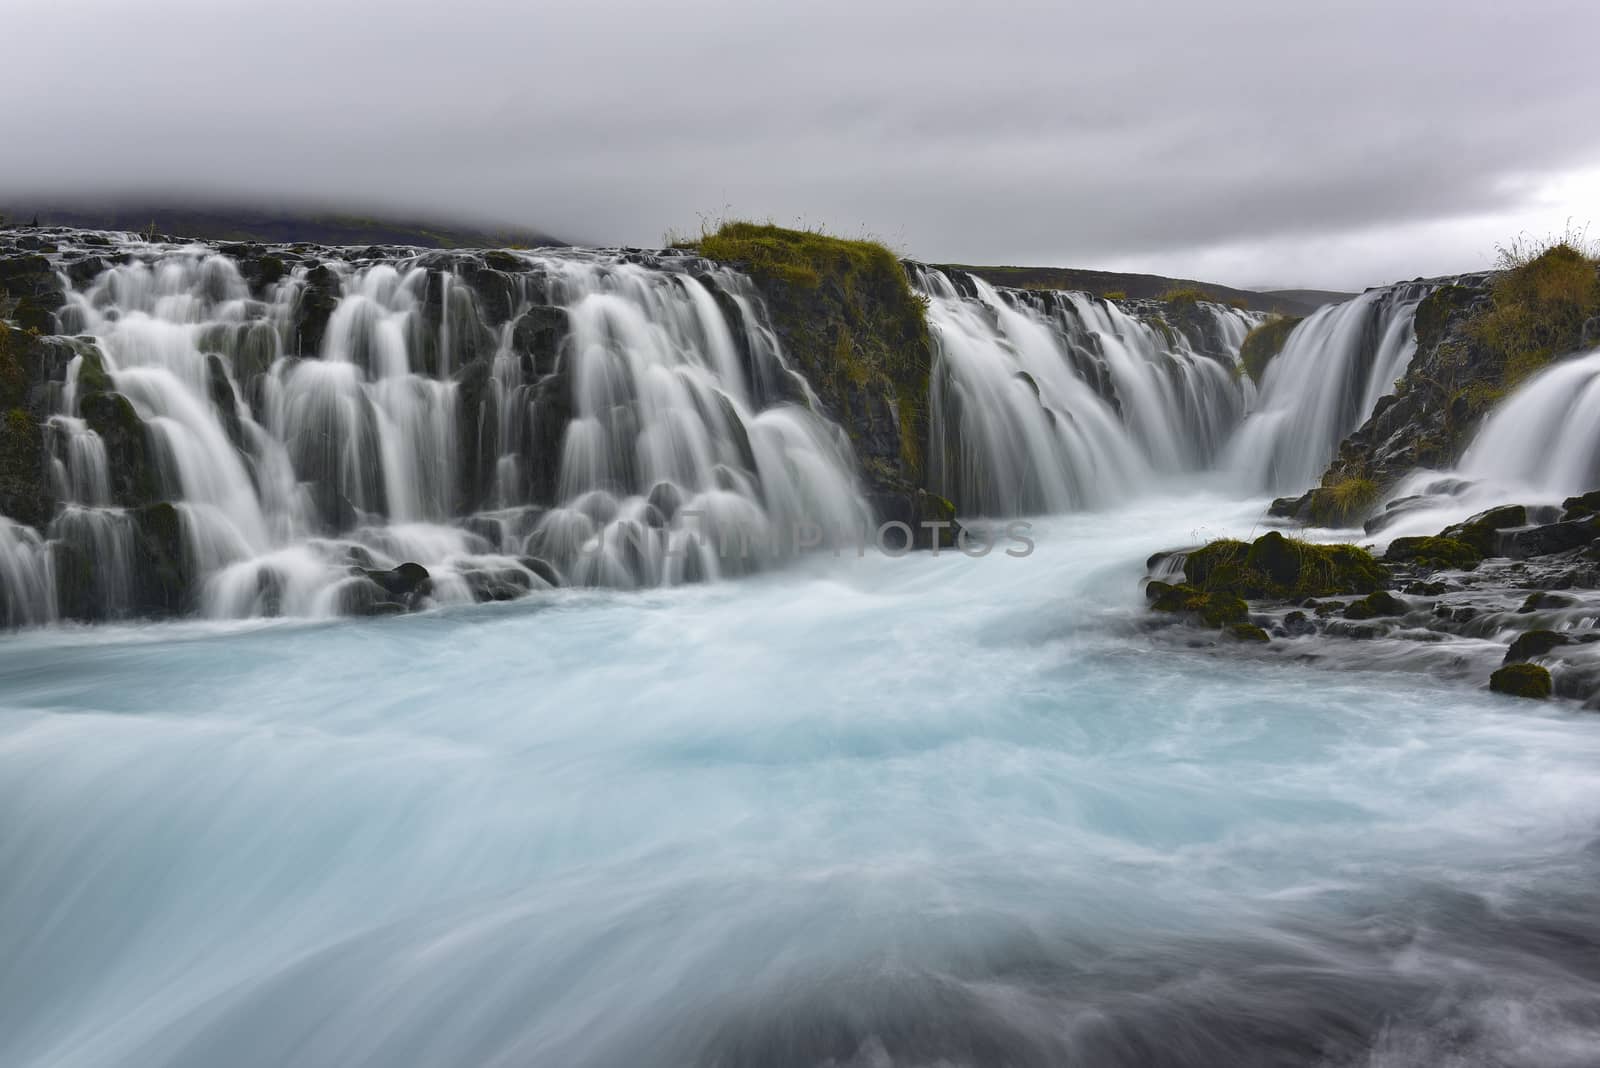 Bruarfoss (Bridge Fall), is a waterfall on the river Bruara, in  by udompeter